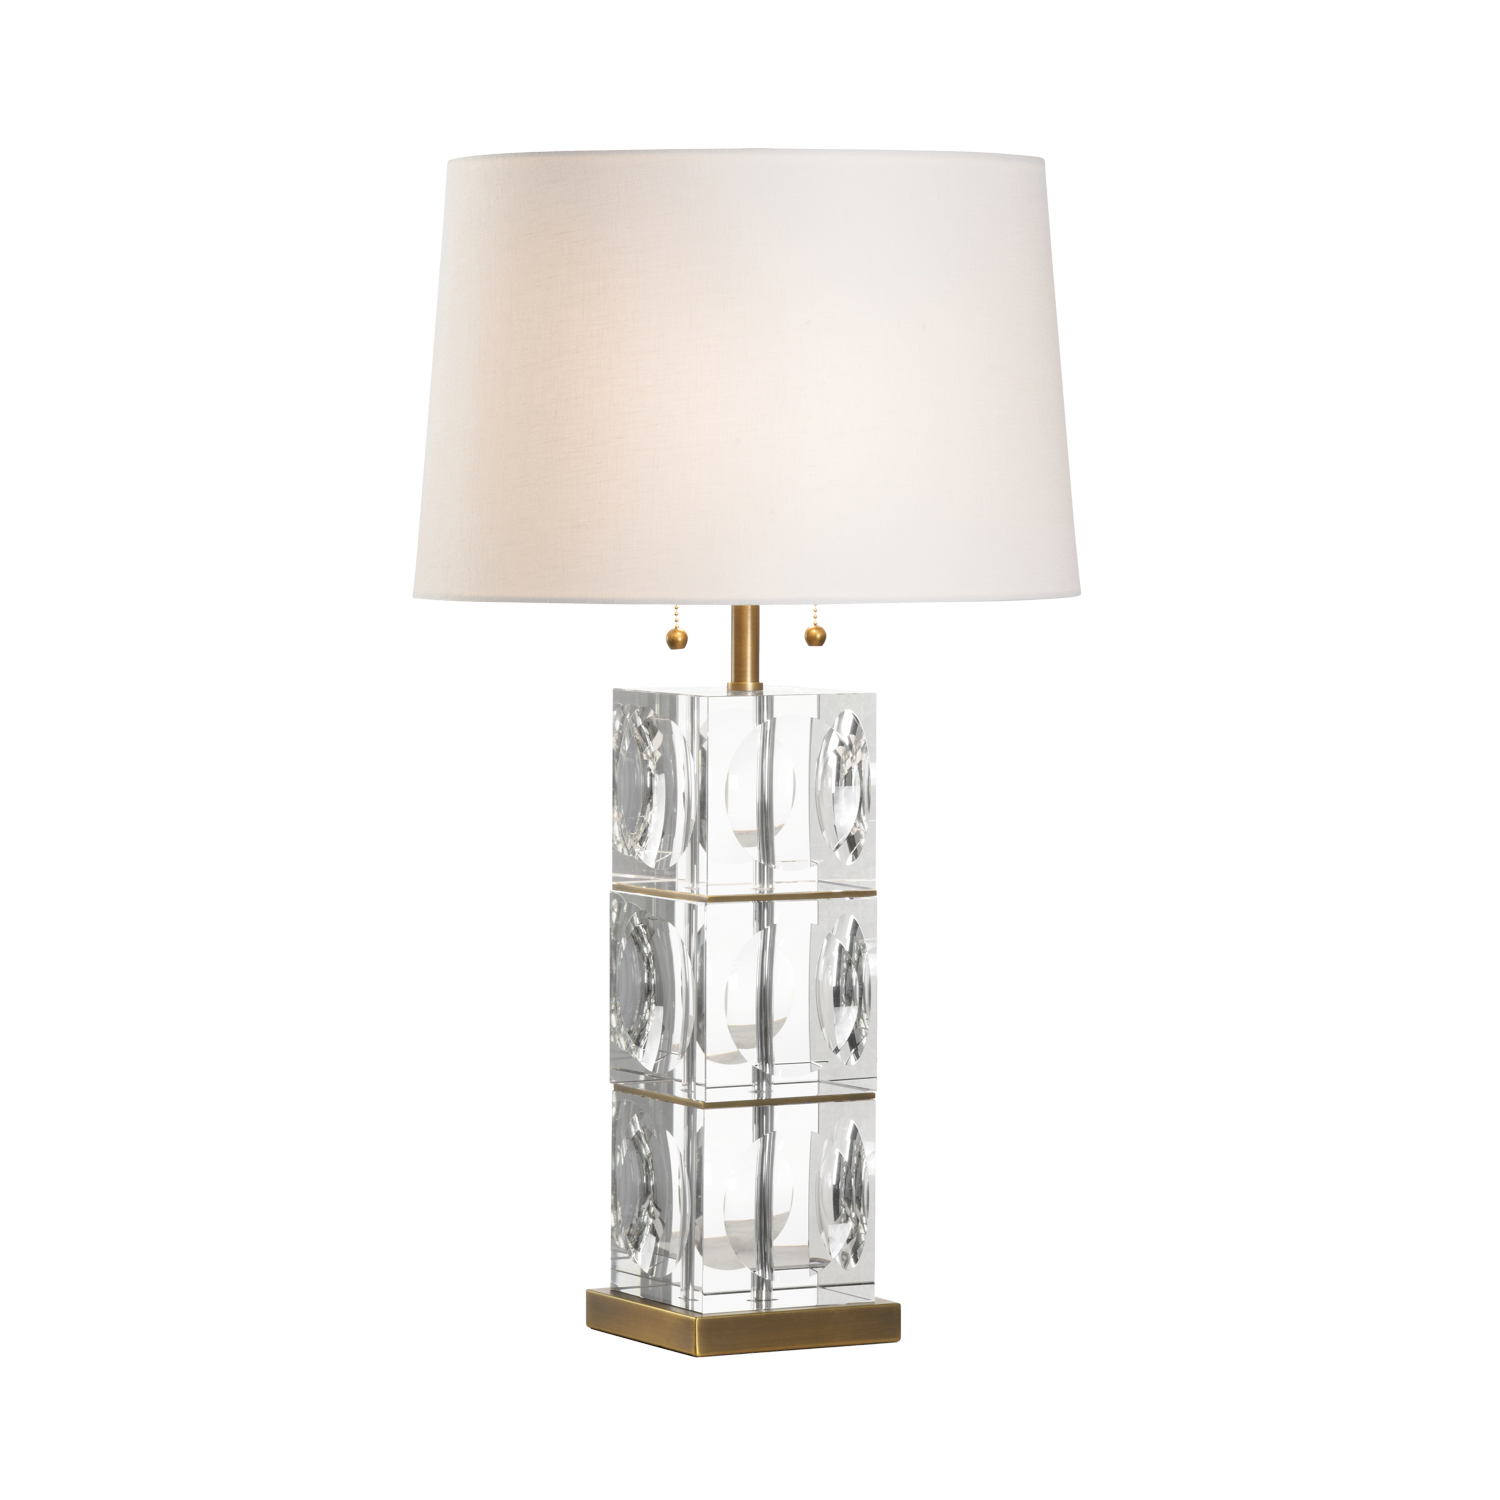 etop lamp with a glass-like vertical base and a white shade by Denise McGaha